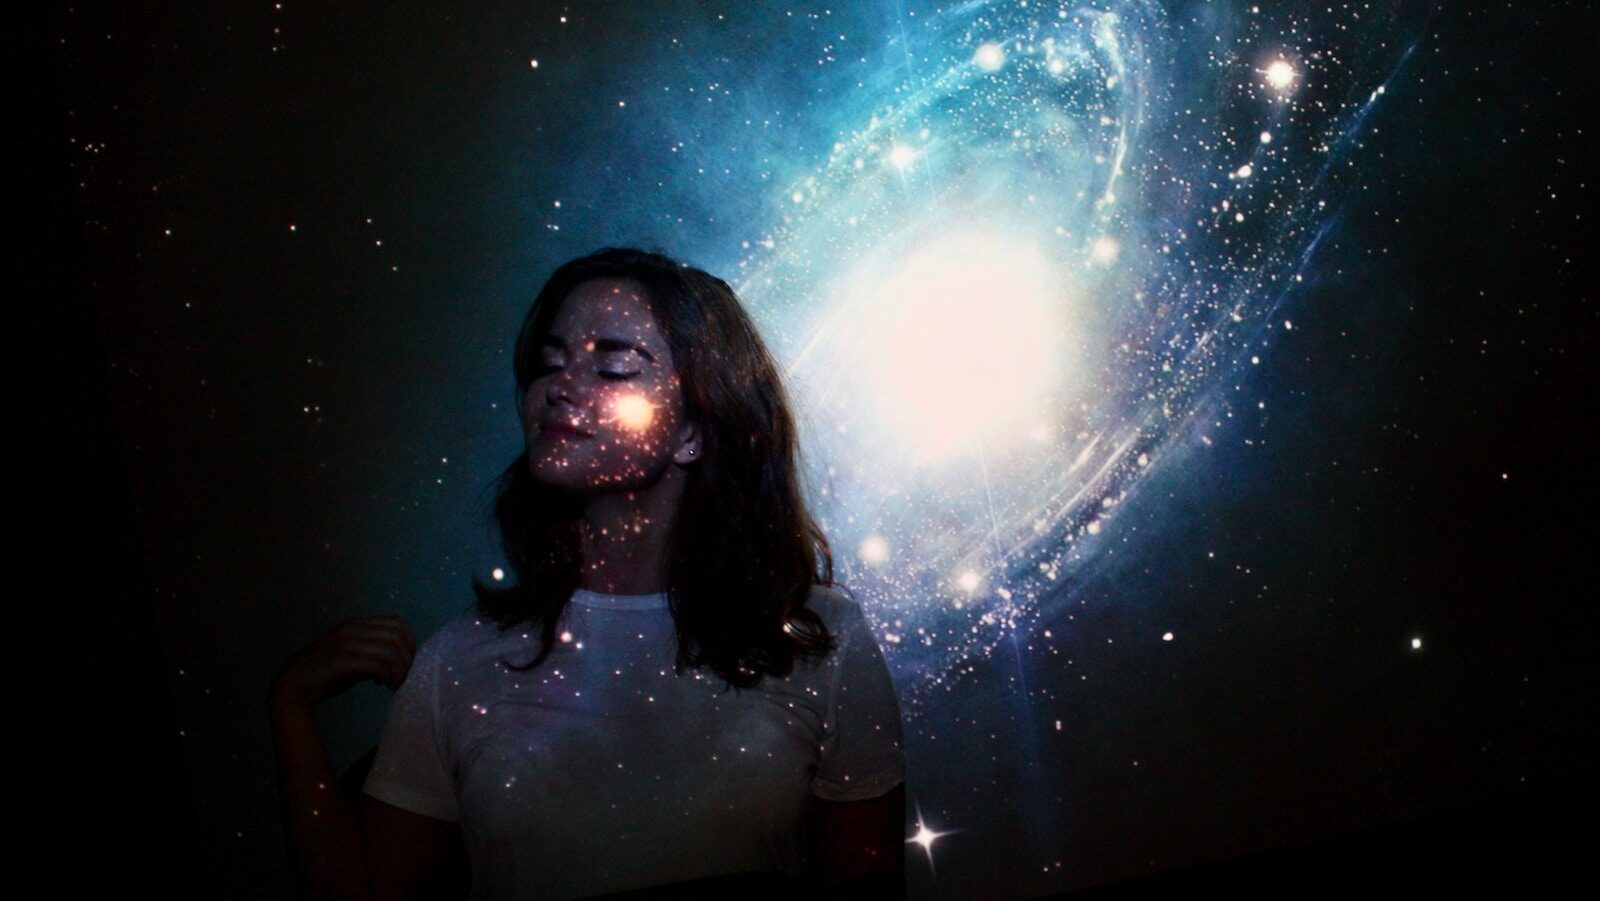 hybrid coaching can combine the intelligence of humans and AI to multiply impact. Image description: a woman stands against a wall with a galaxy projection covering her face and shirt.